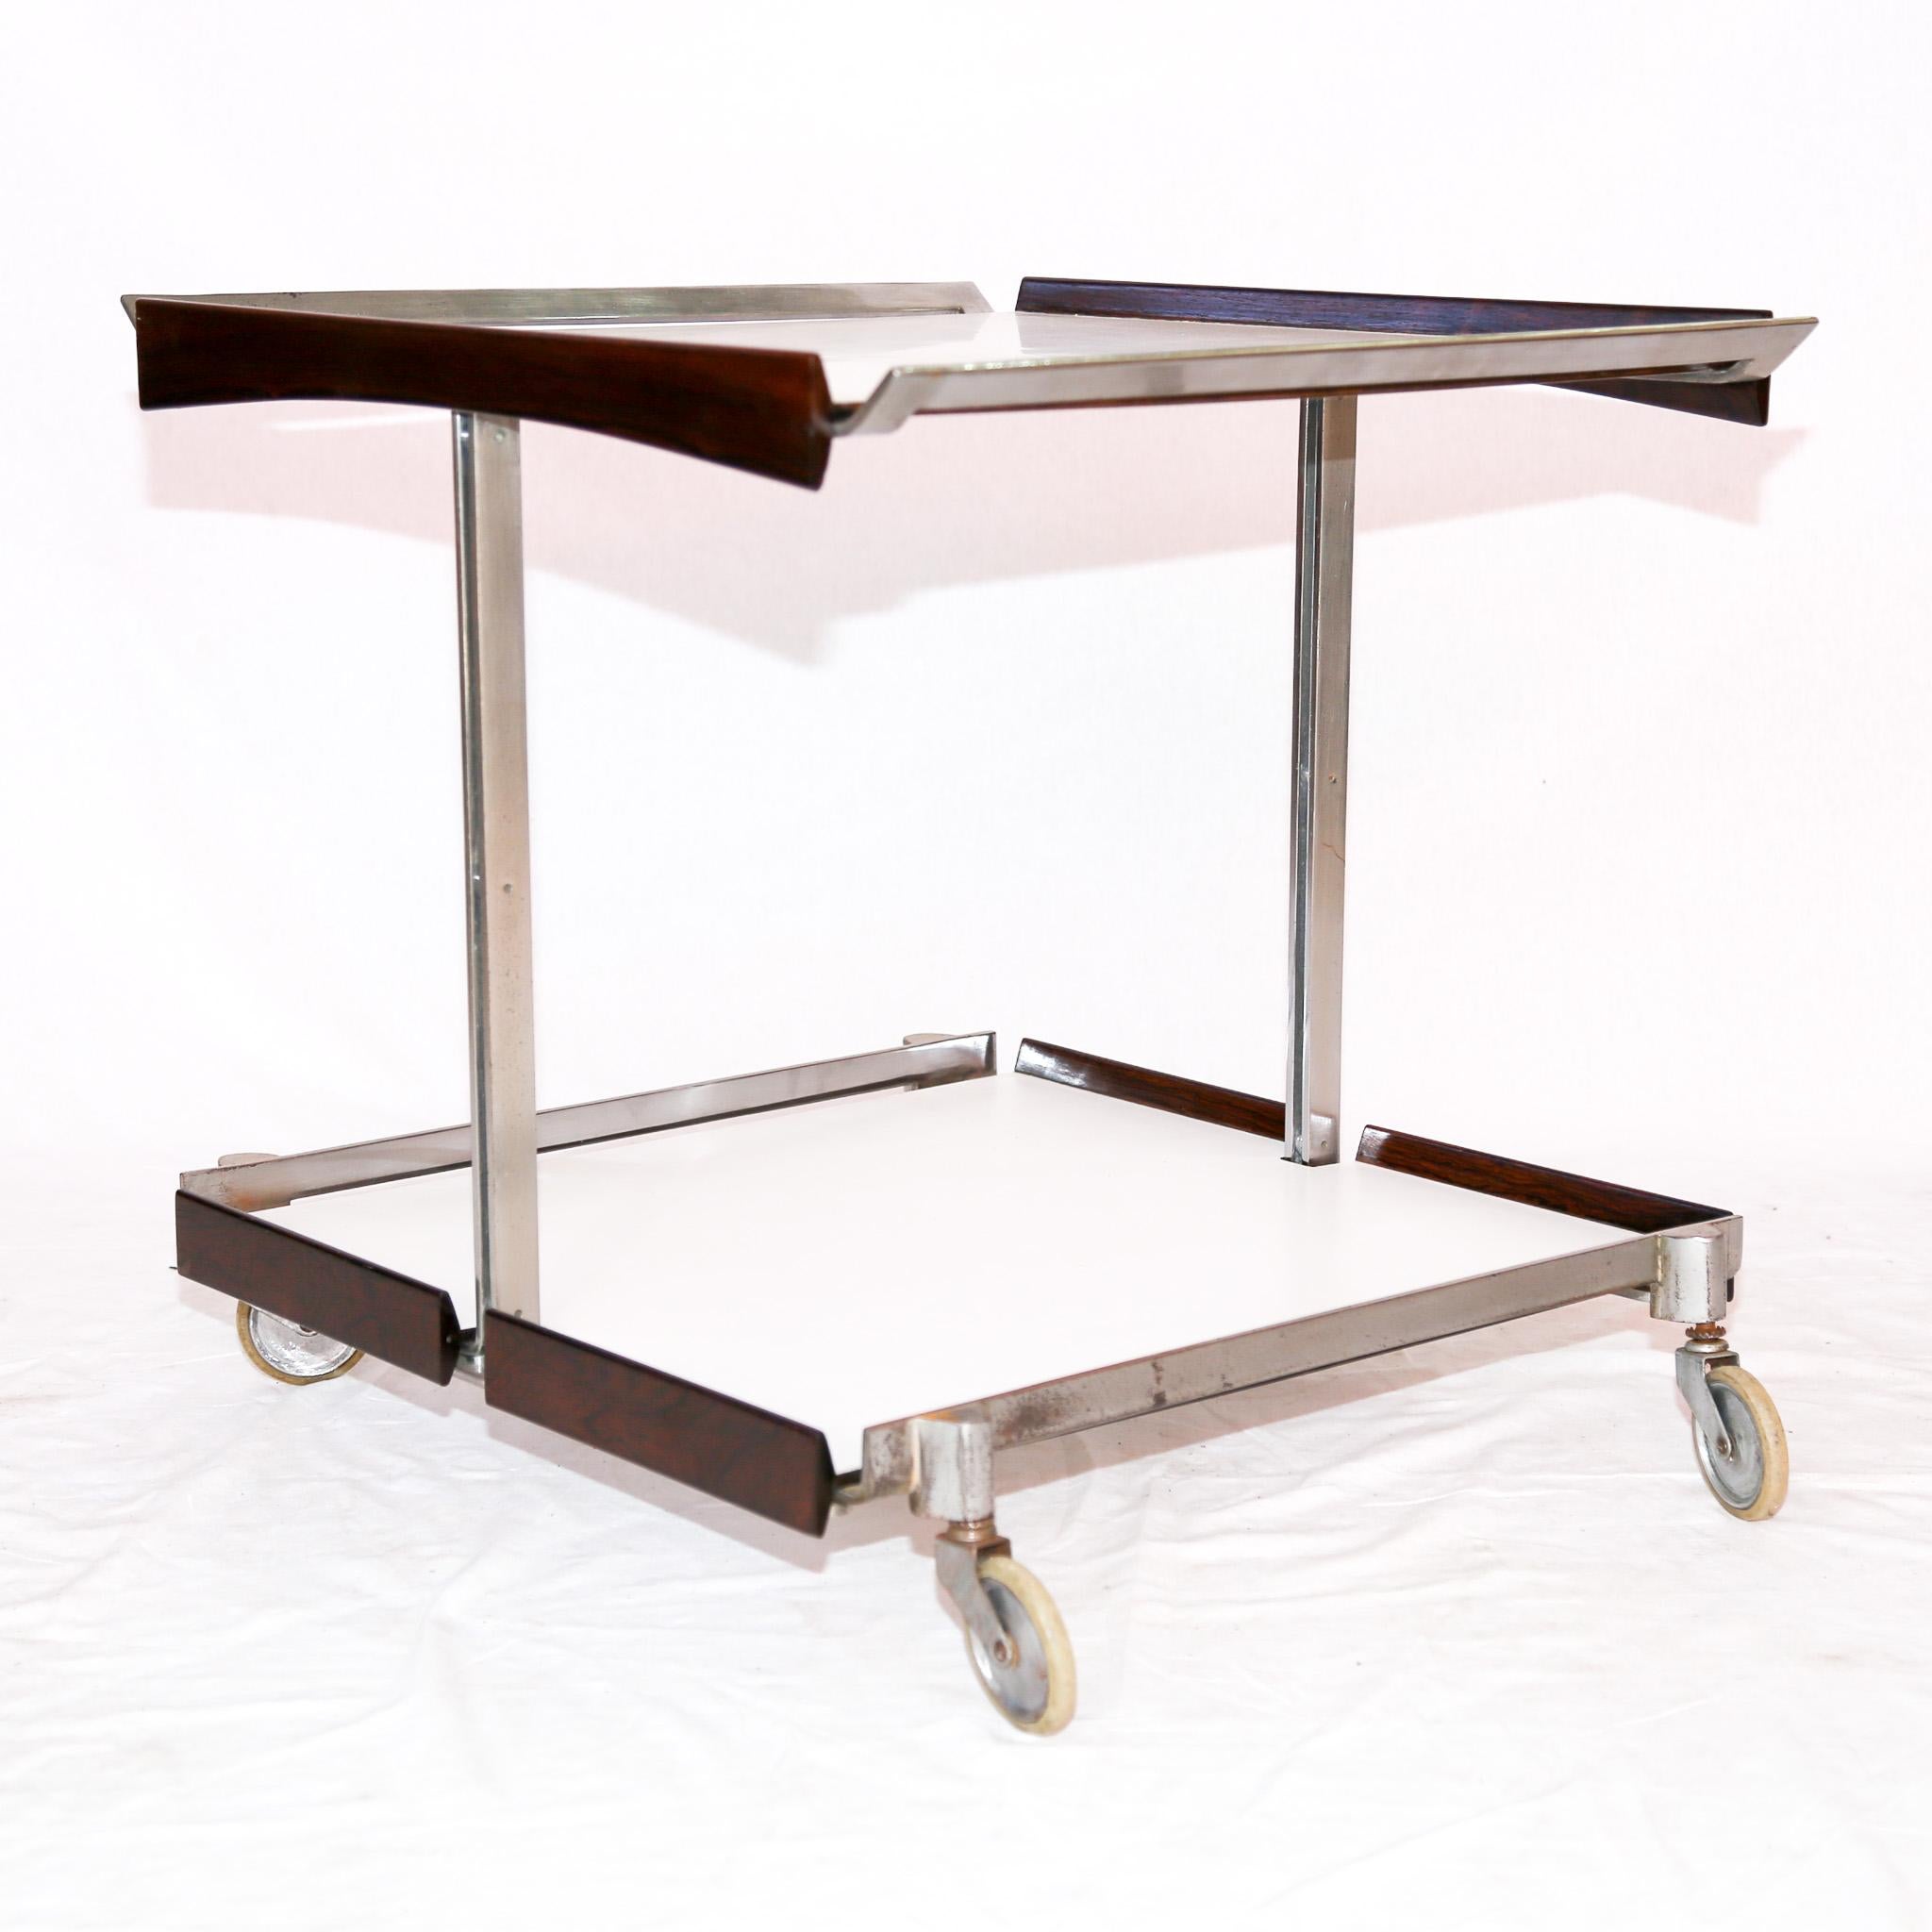 Brazilian Modern Bar Cart in Hardwood, Chrome, and White Formica by Forma, 1960s For Sale 2